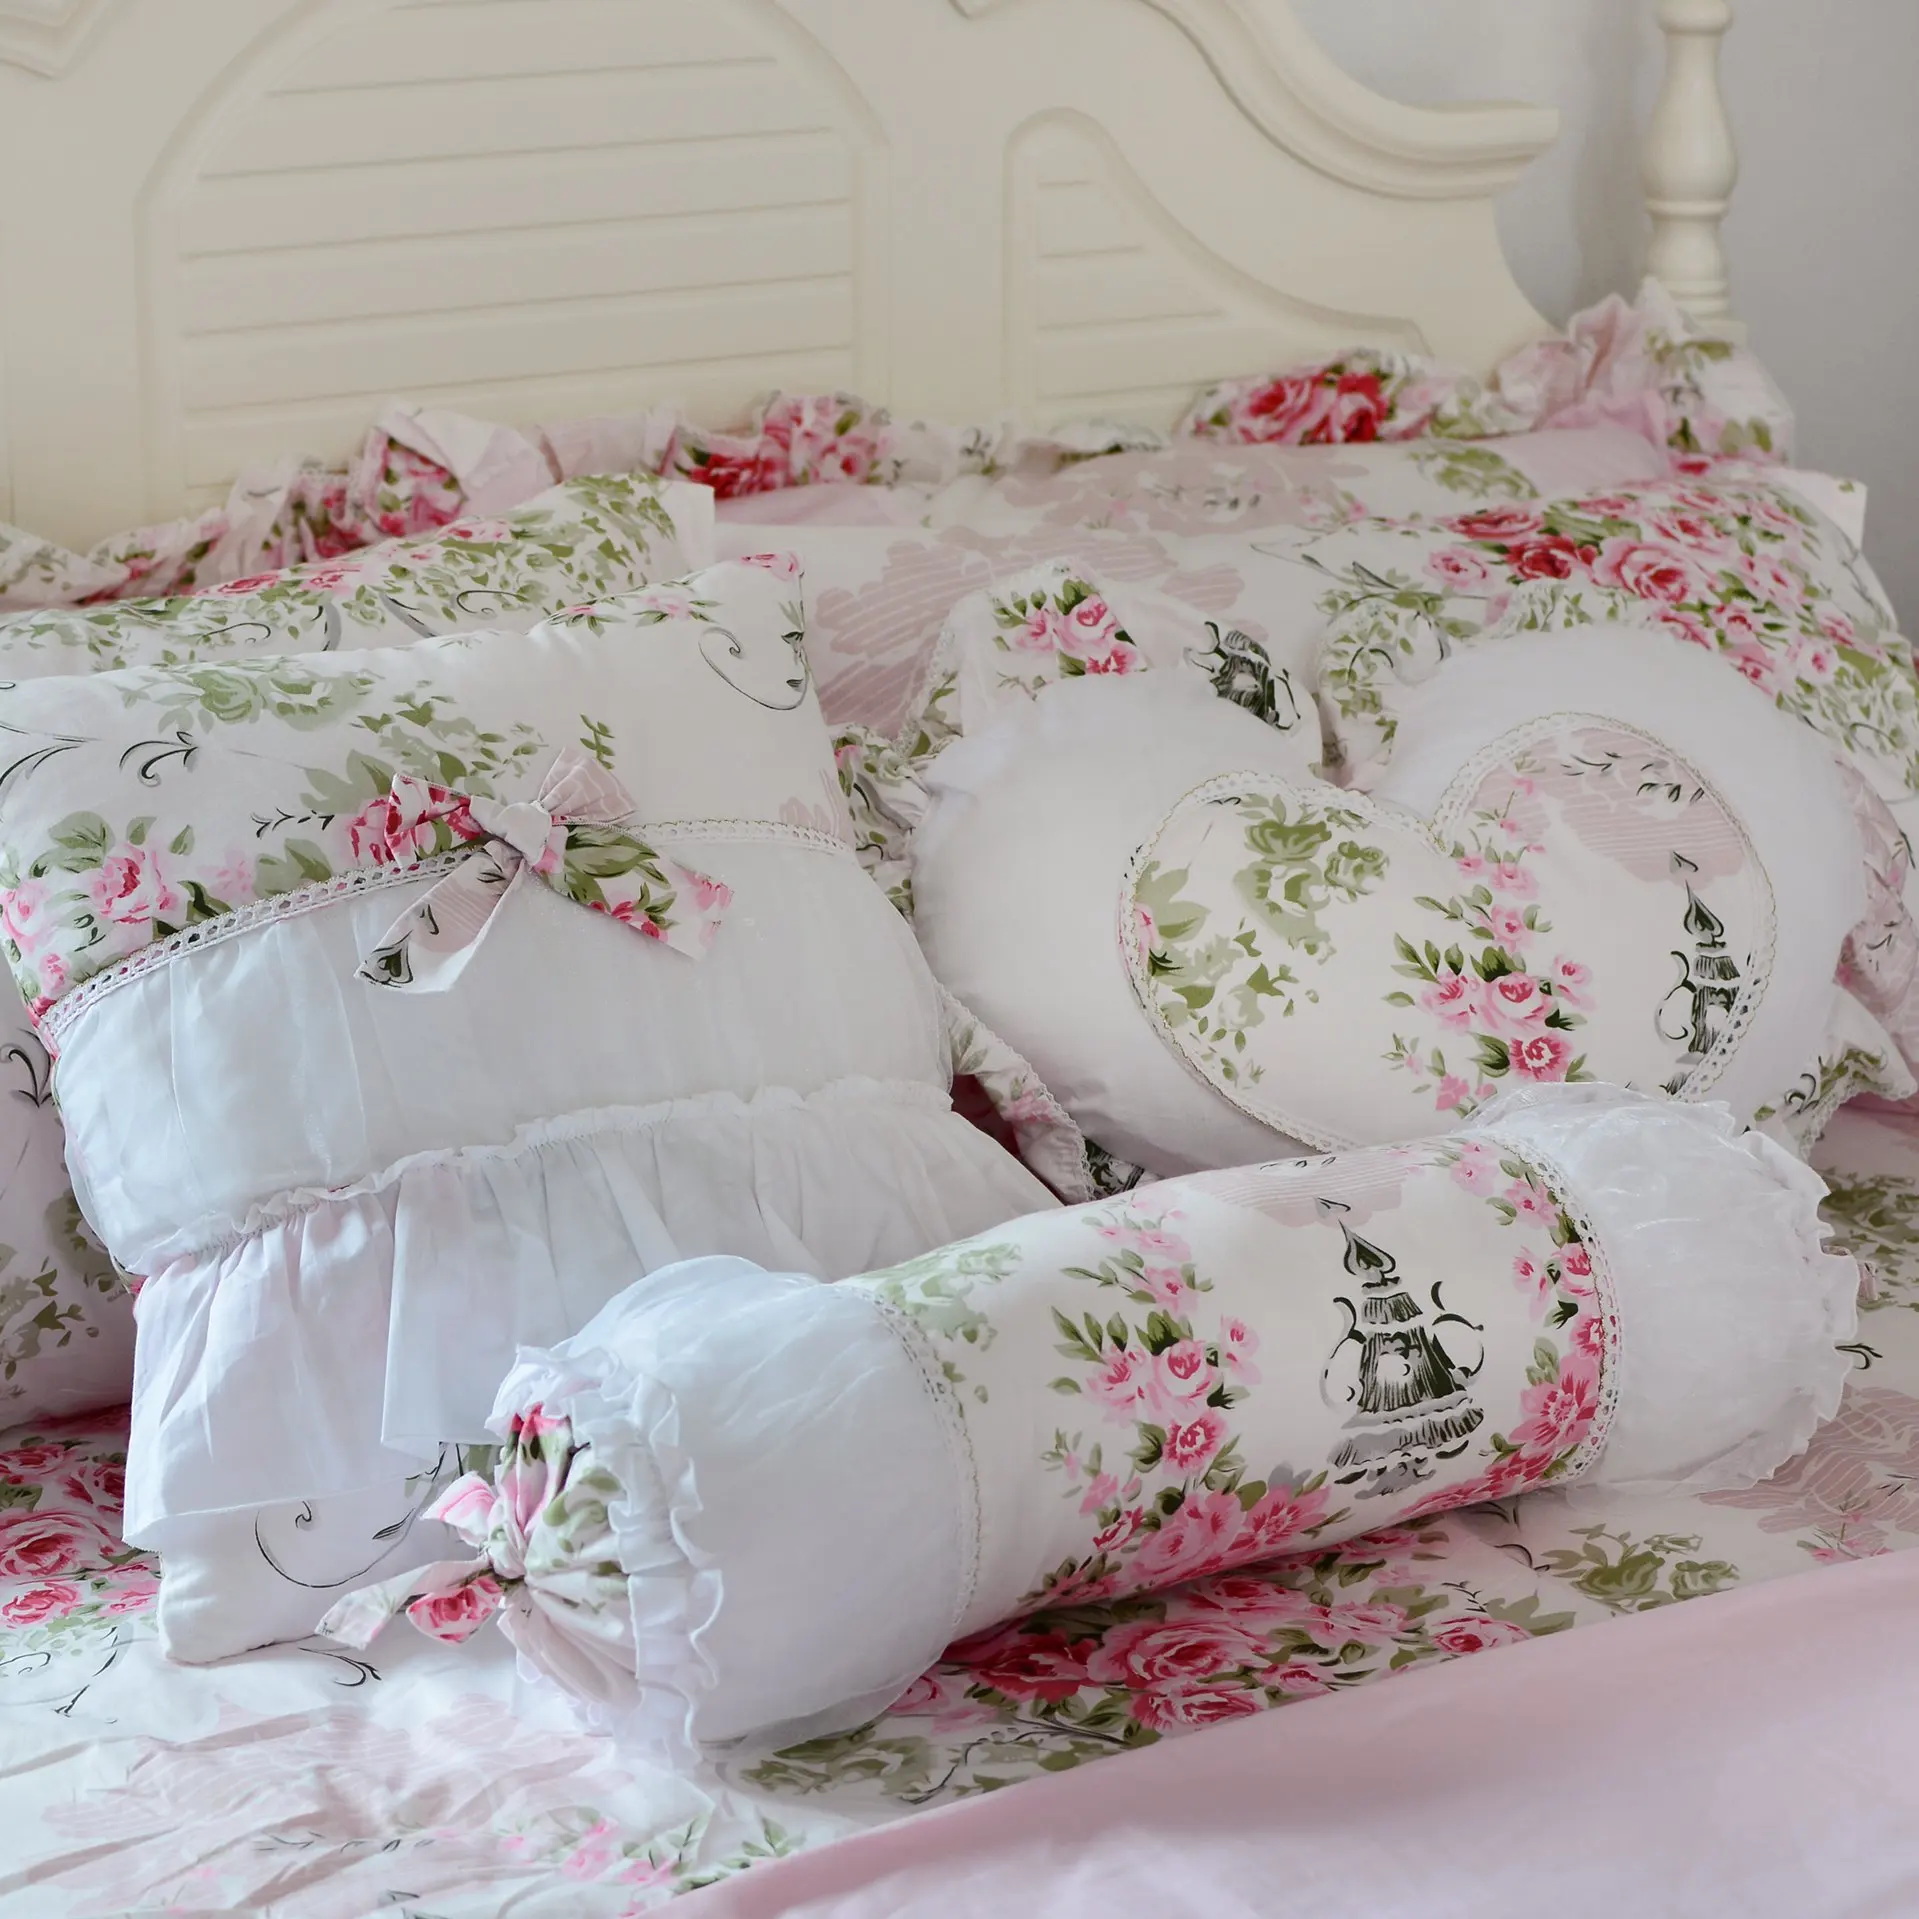 large square bed pillows